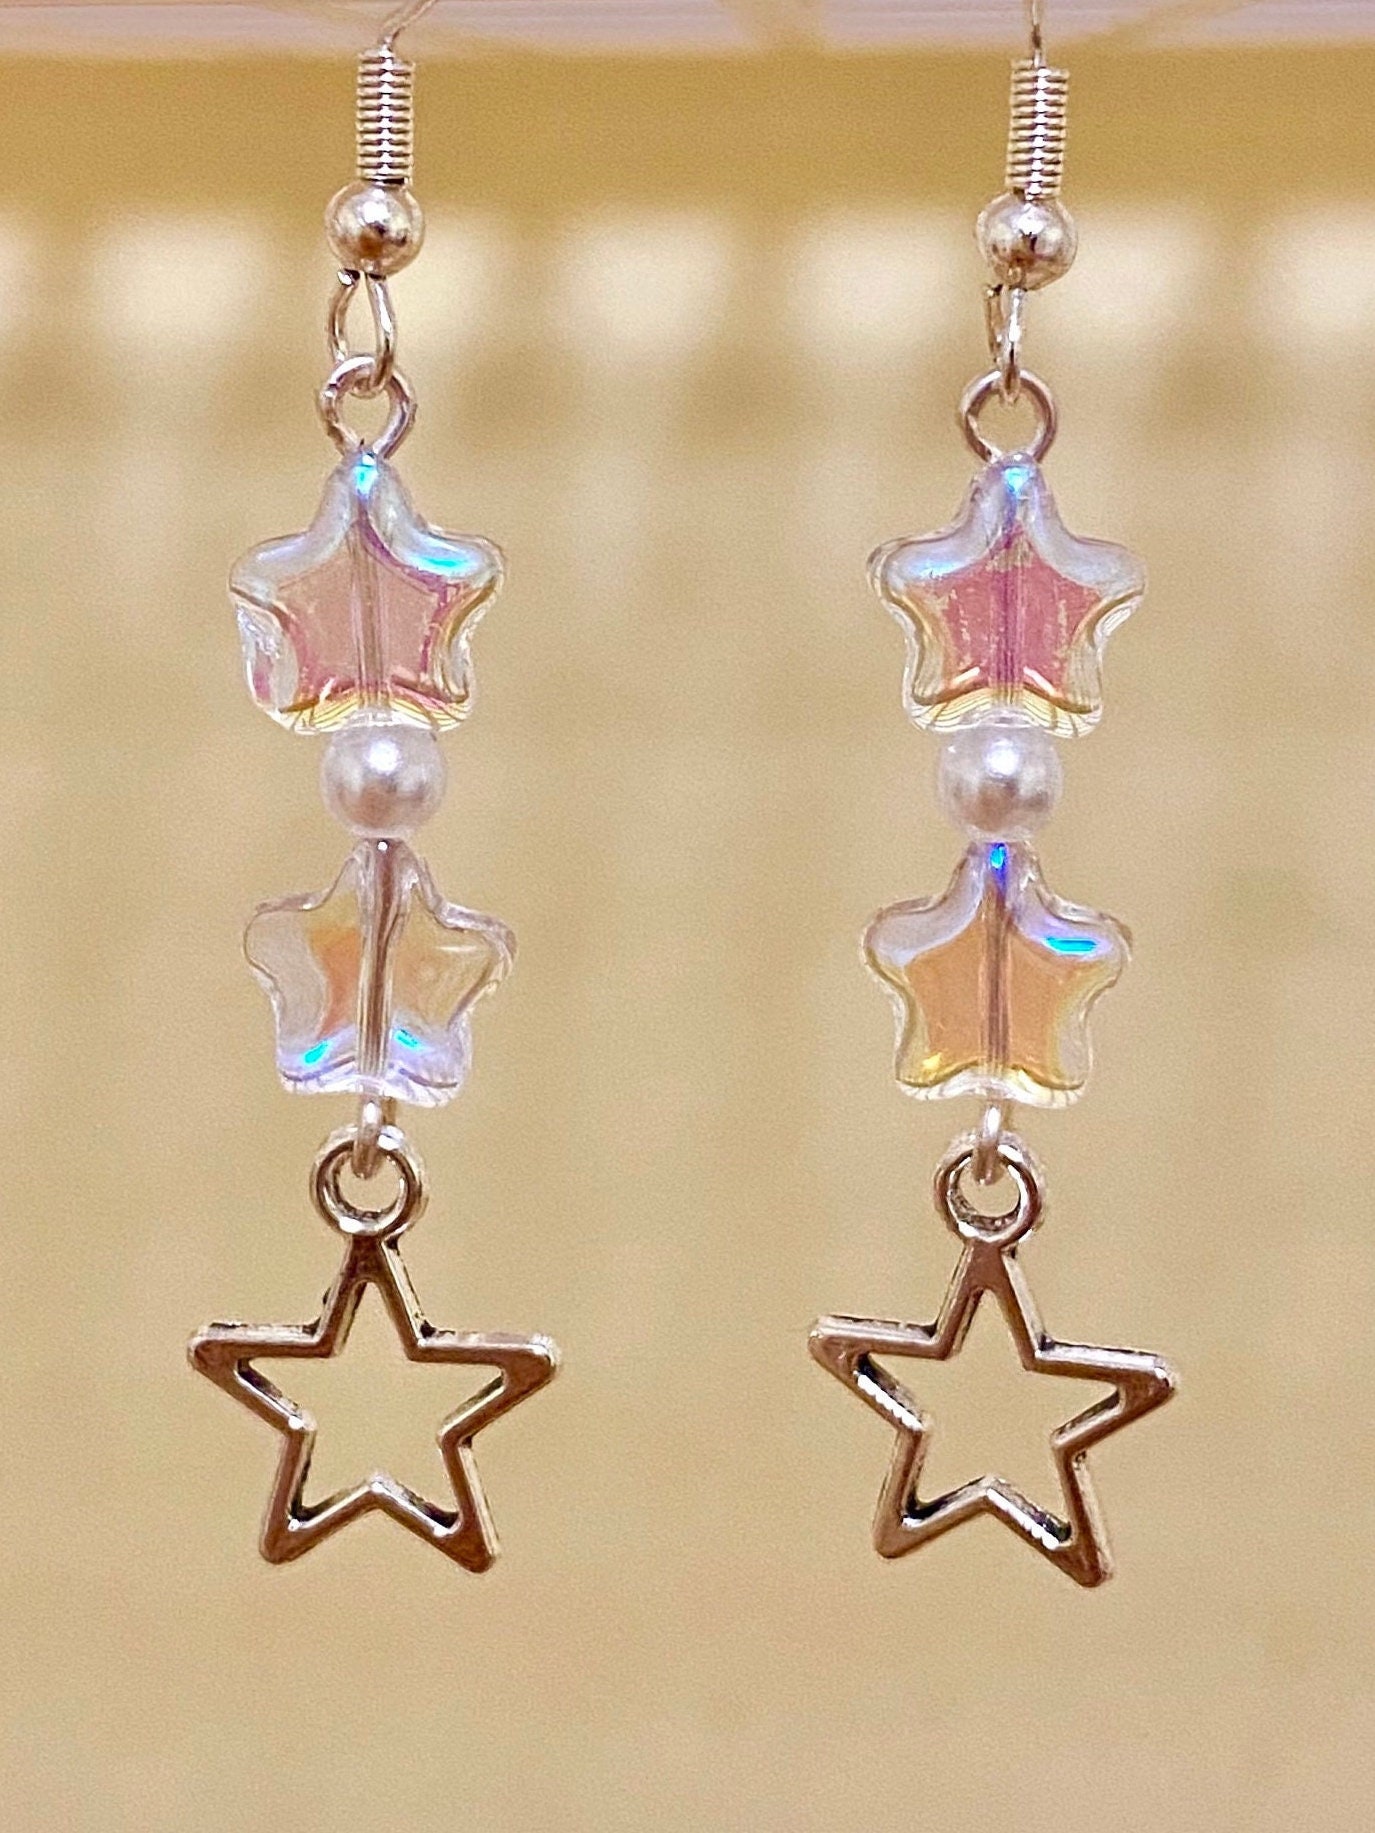 Do y'all remember these spiky silicone earrings everyone had in the early  2000's? : r/nostalgia